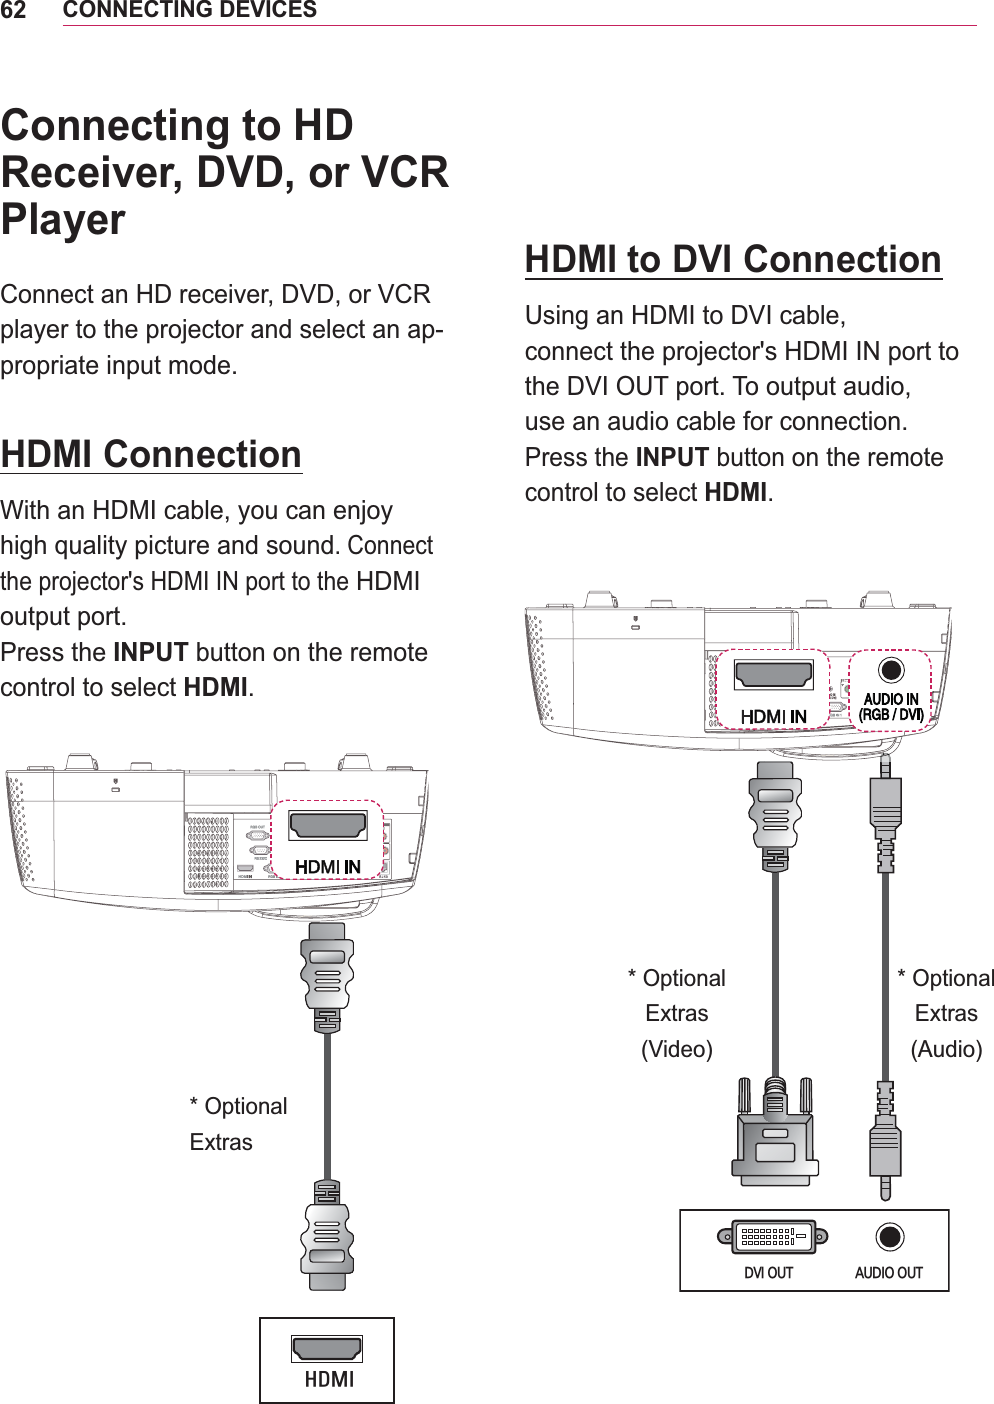 62CONNECTING DEVICESConnecting to HD Receiver, DVD, or VCR Playerplayer to the projector and select an ap-propriate input mode.HDMI Connectionhigh quality picture and sound. Connect output port.Press the INPUT button on the remote control to select HDMI.+&apos;0,HDMI to DVI Connectionthe DVI OUT port. To output audio, use an audio cable for connection.Press the INPUT button on the remote control to select HDMI.DVI OUT AUDIO OUT* Optional* Optional(Video)* Optional(Audio)